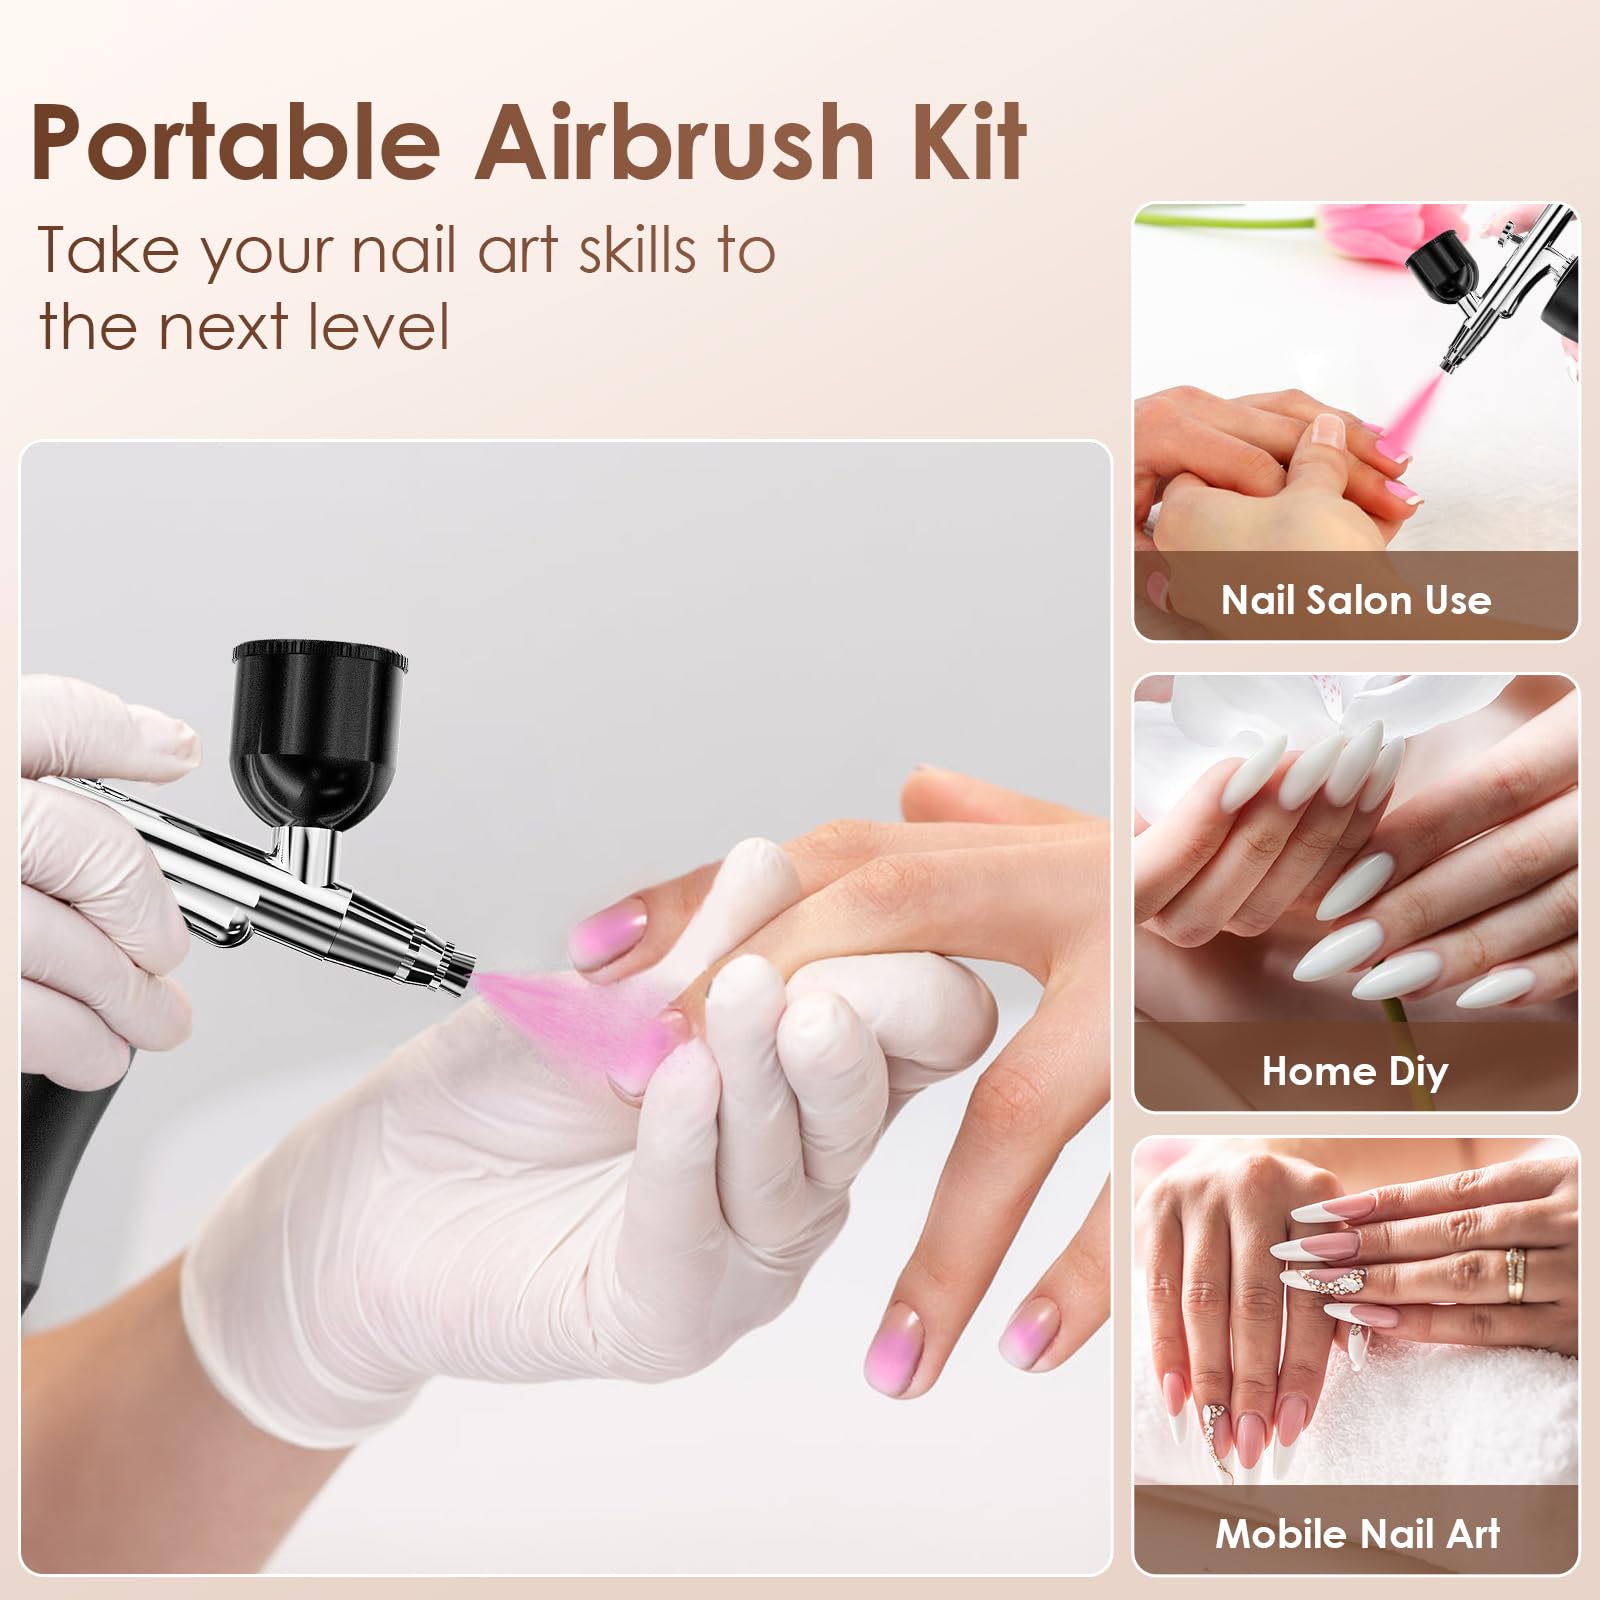 Airbrush-Kit Rechargeable Cordless Airbrush Compressor - Auto Handheld  Airbrush Set, Portable Wireless Air Brush For Barber, Nail Art, Cake Decor,  Makeup, Model Painting